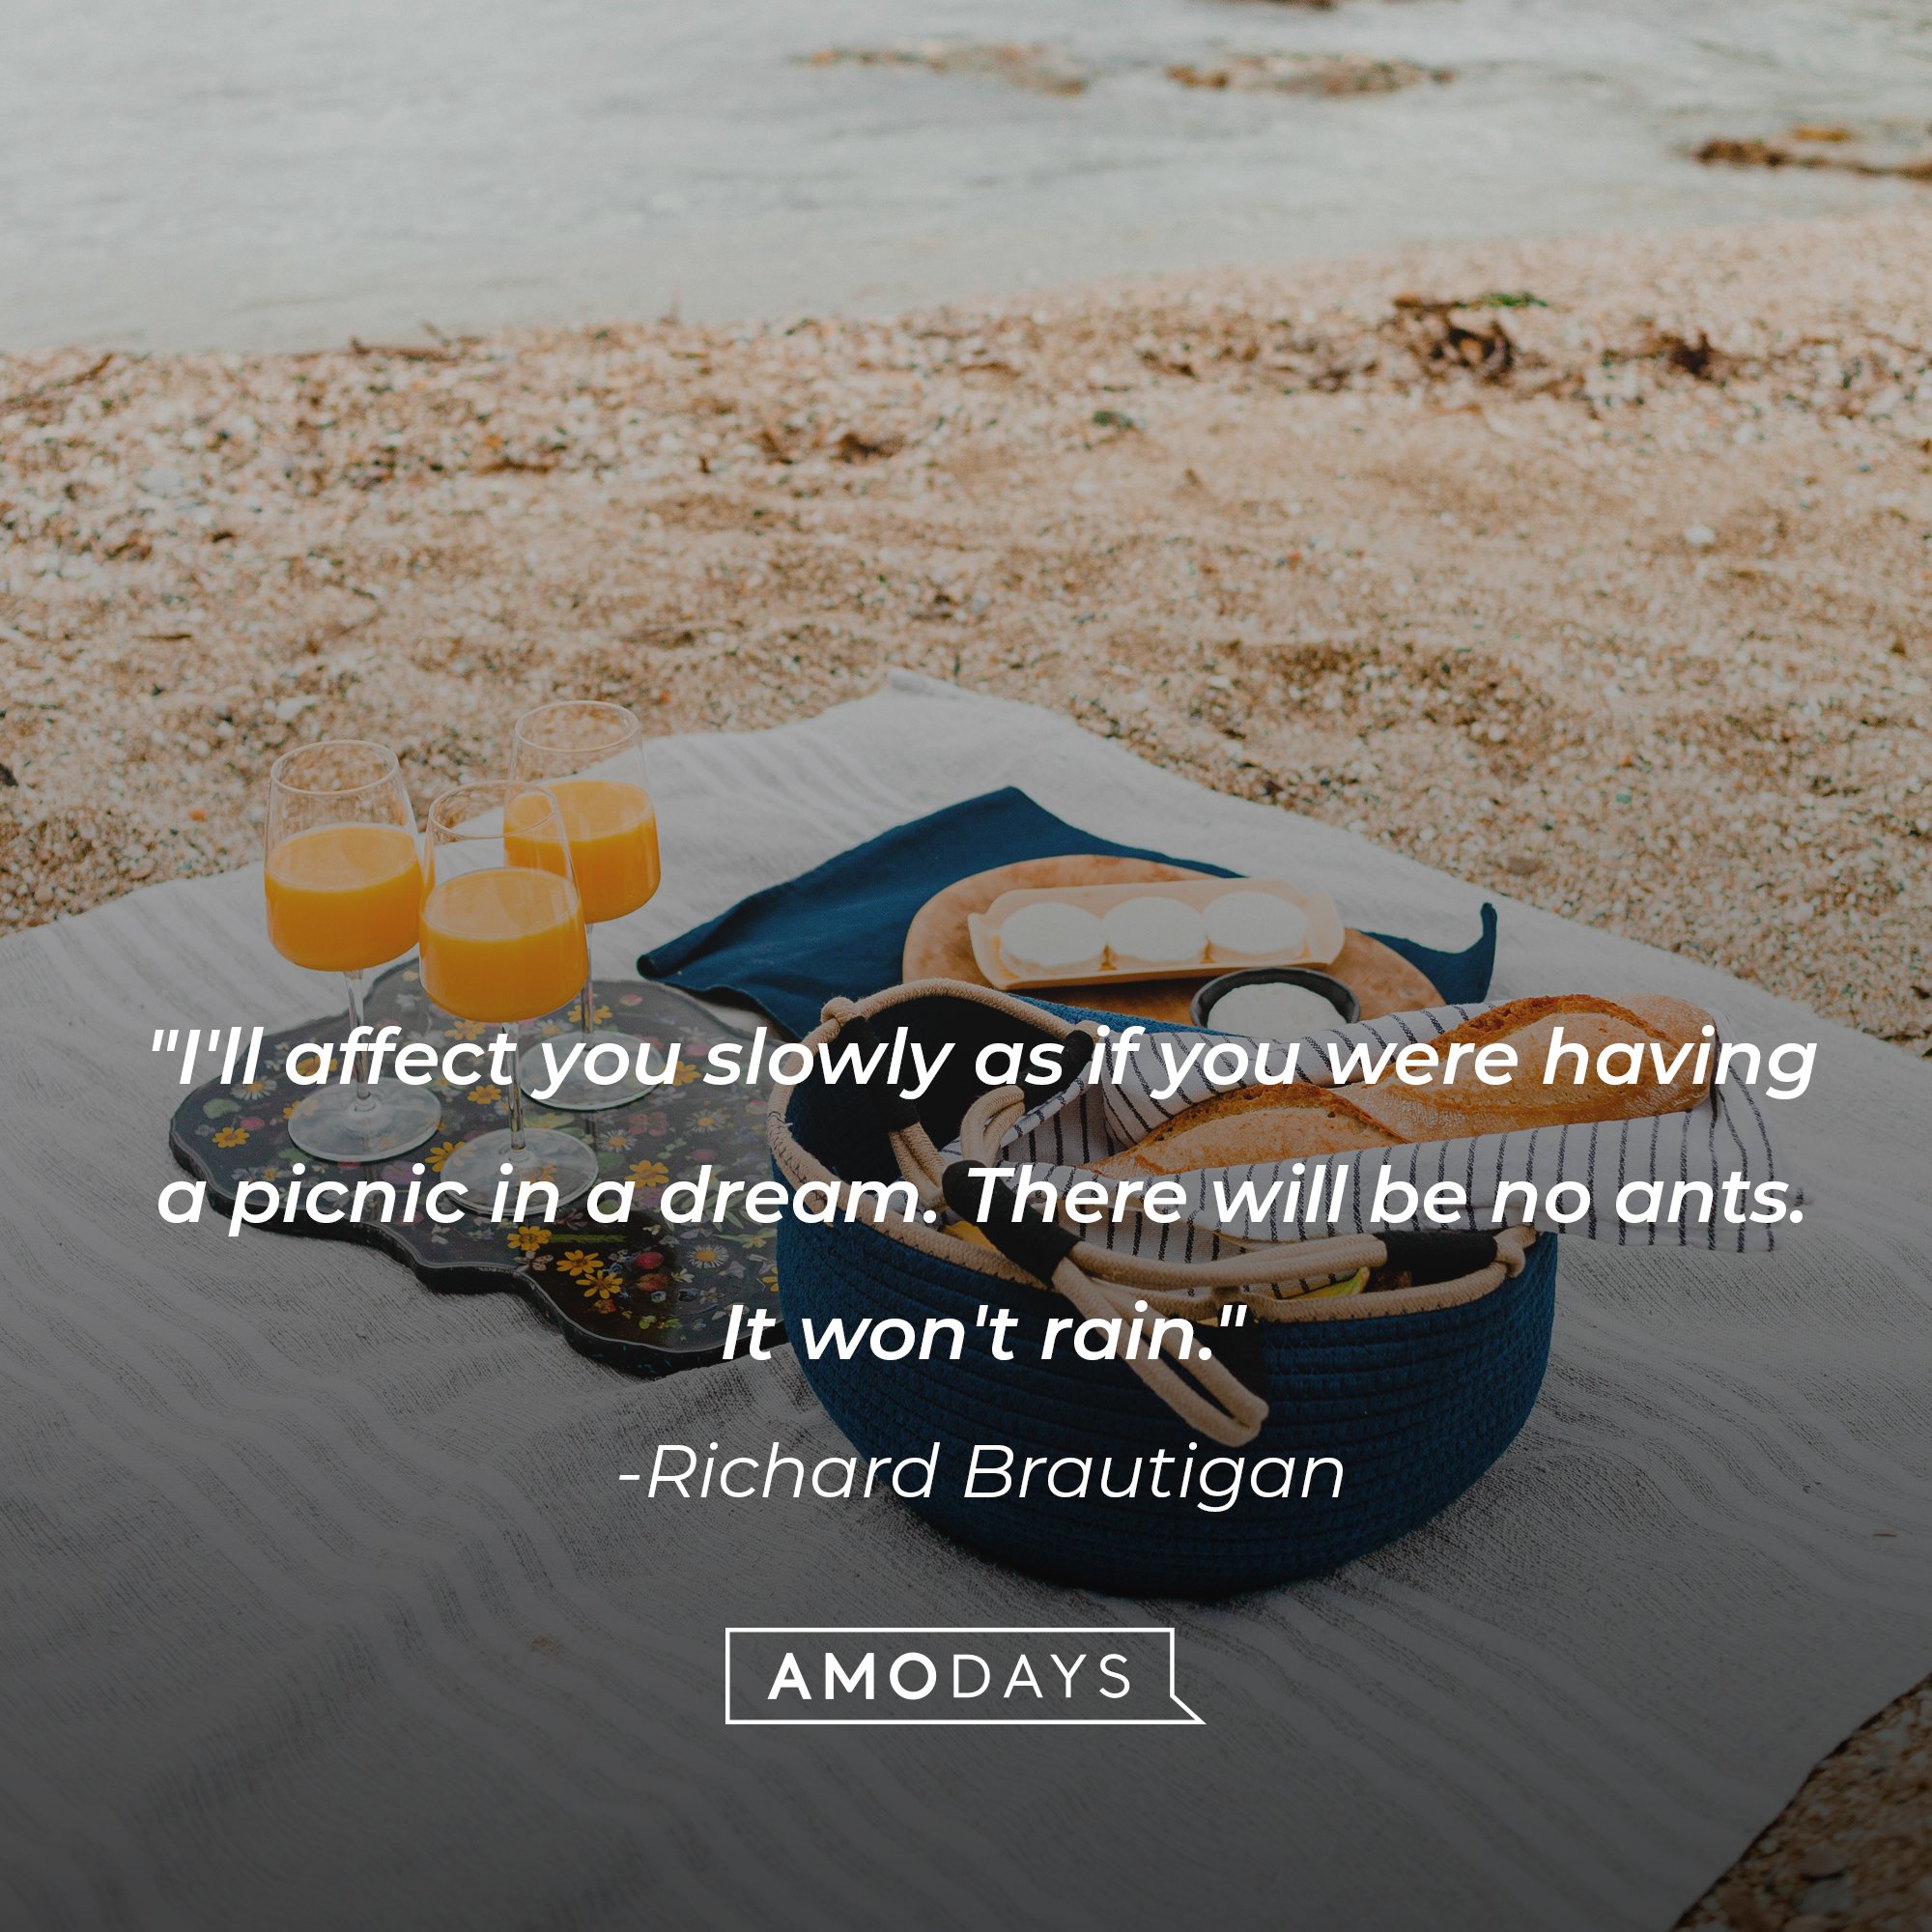 Richard Brautigan's quote: "I'll affect you slowly as if you were having a picnic in a dream. There will be no ants. It won't rain." | Image: AmoDays